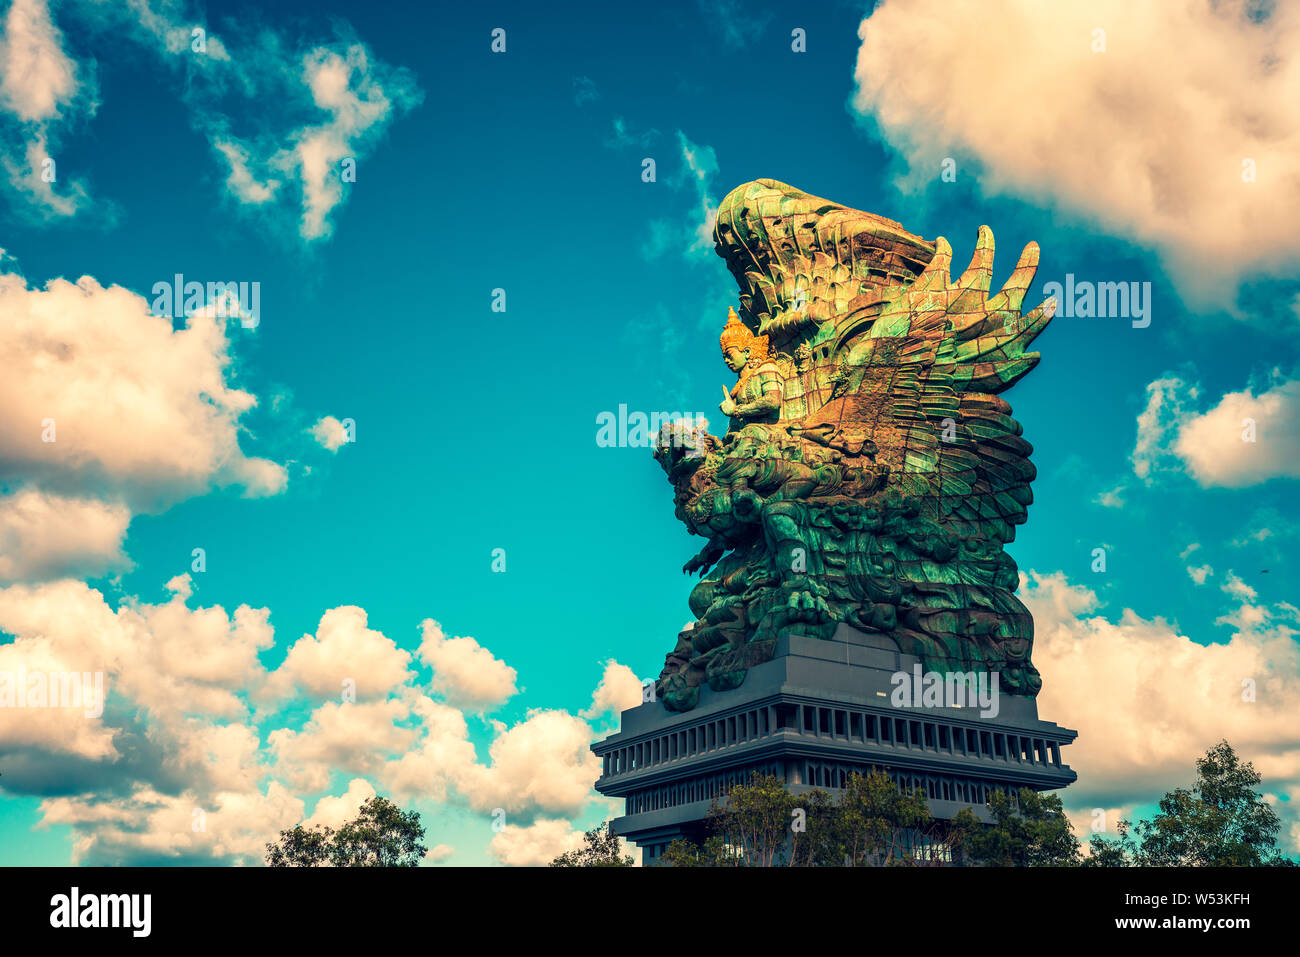 Page 3 - Gwk High Resolution Stock Photography and Images - Alamy